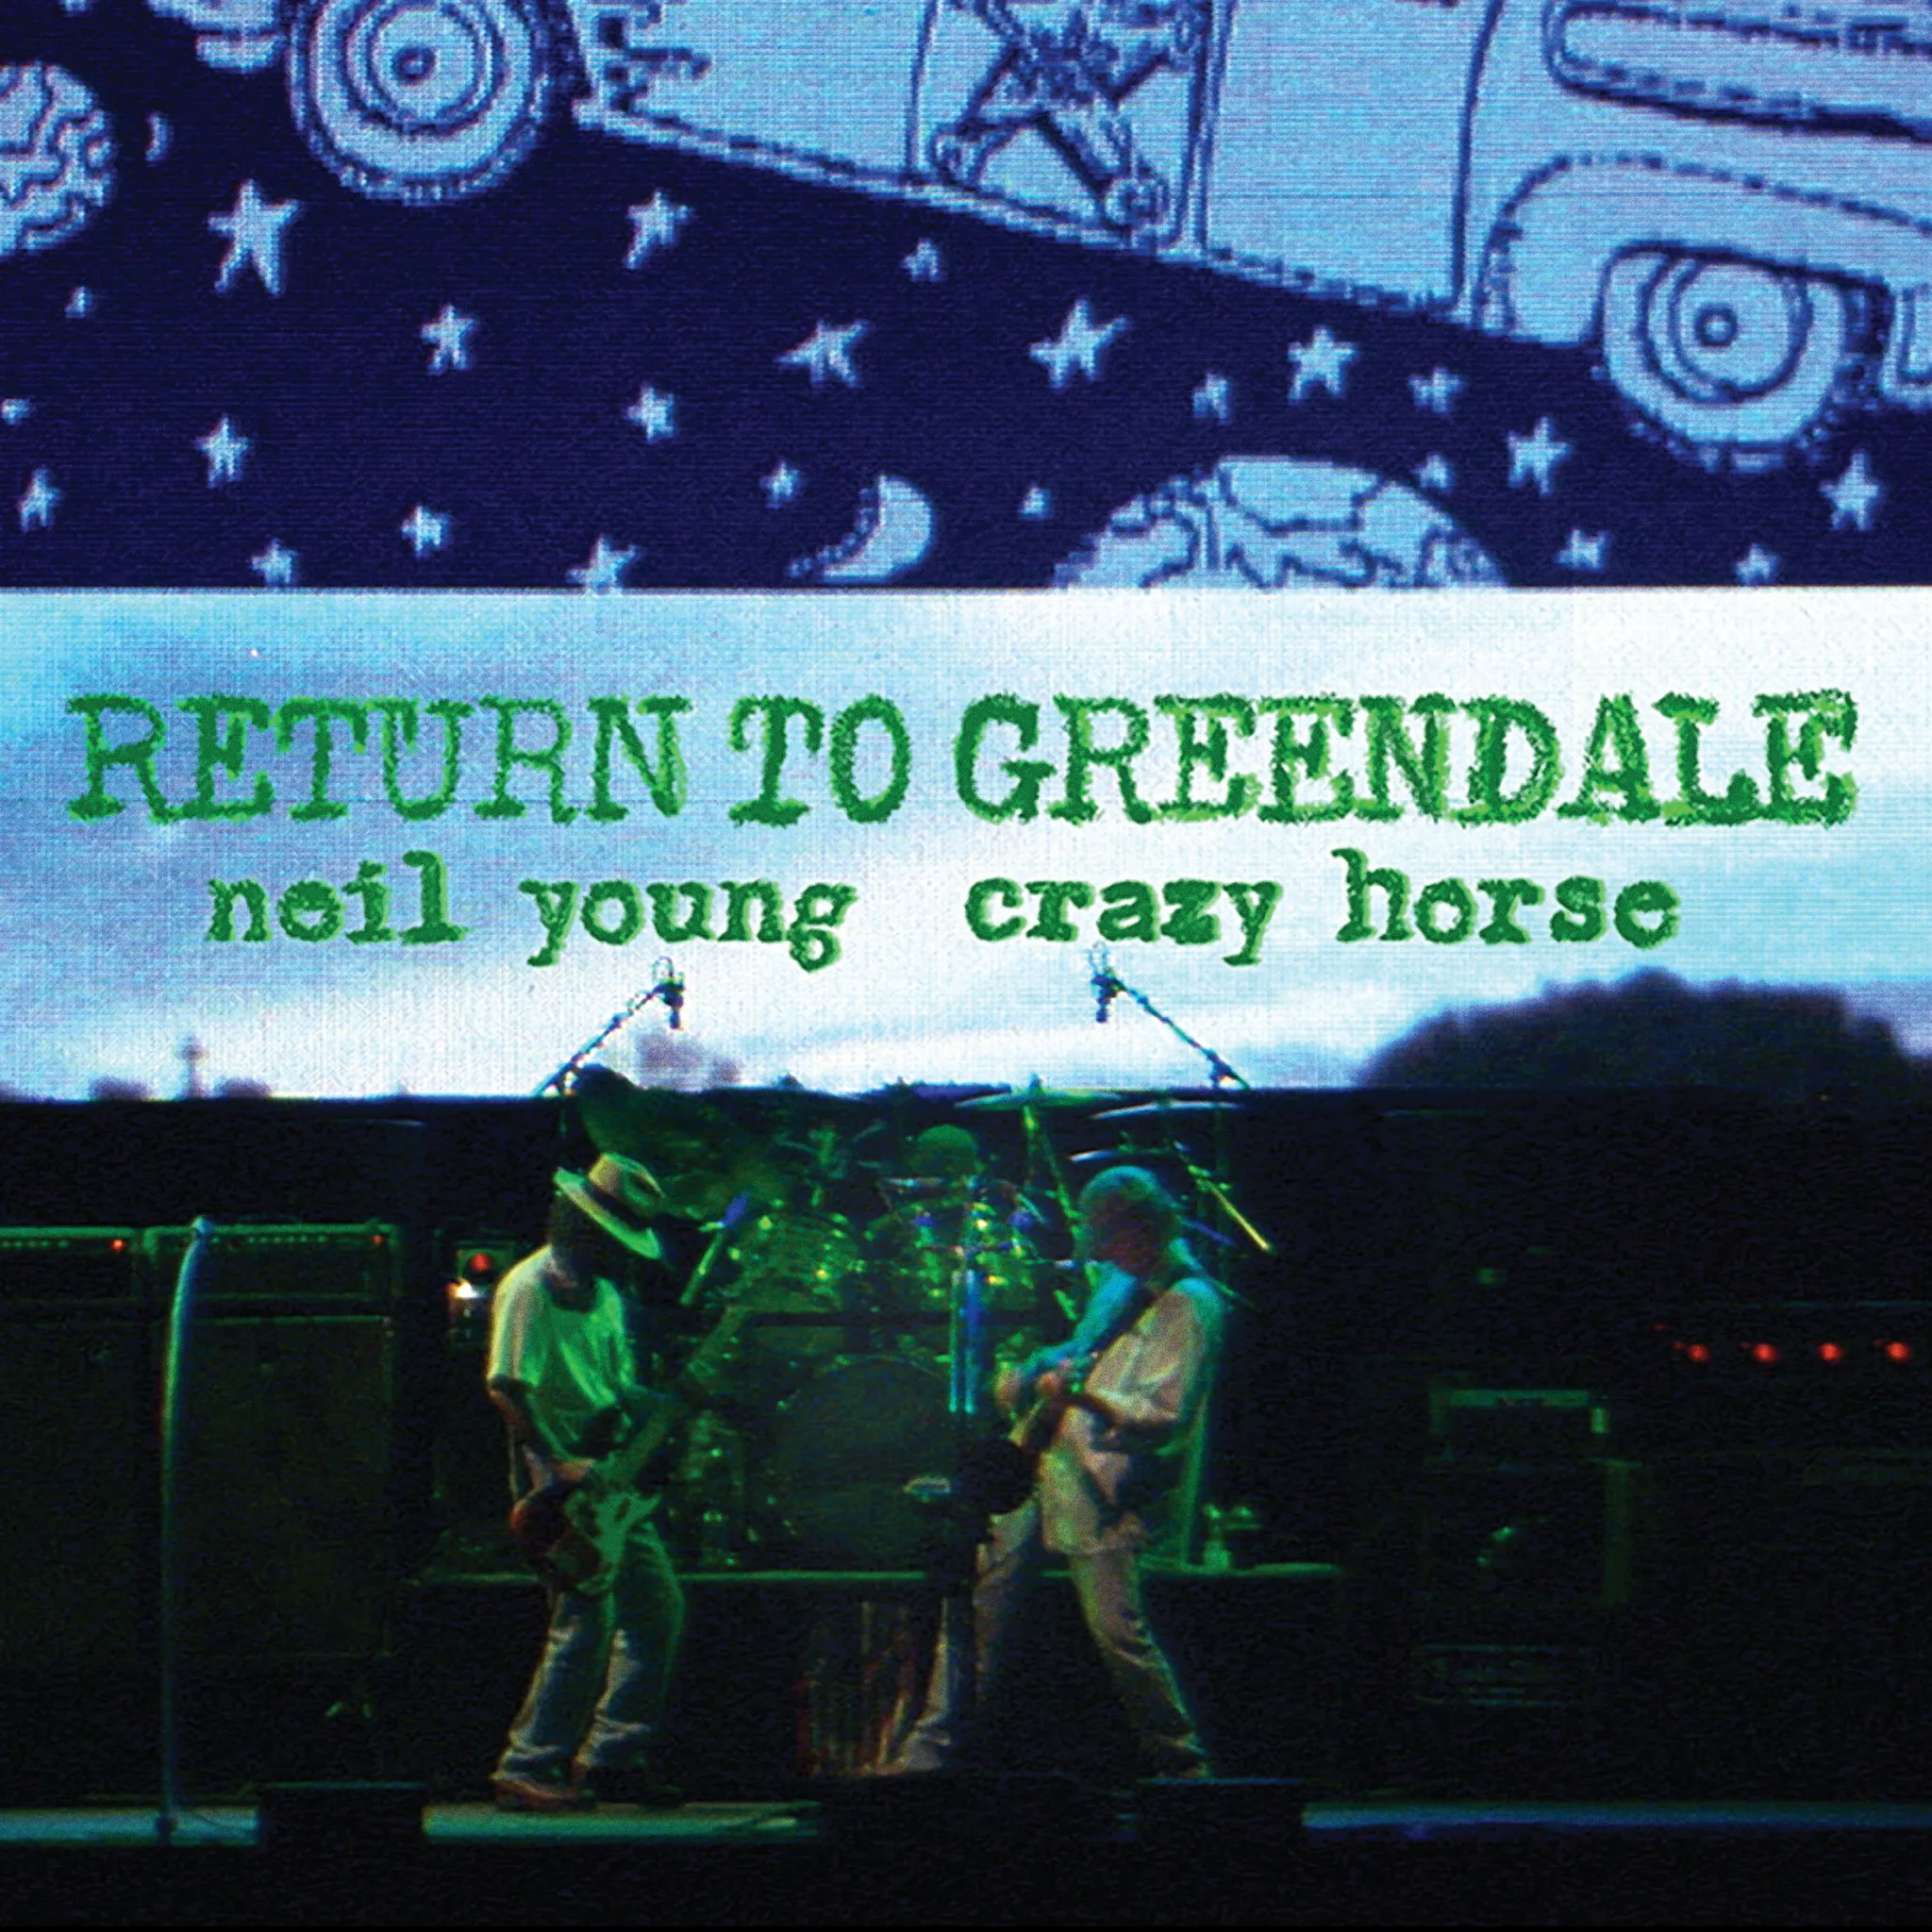 Neil Young - Return to Greendale artwork